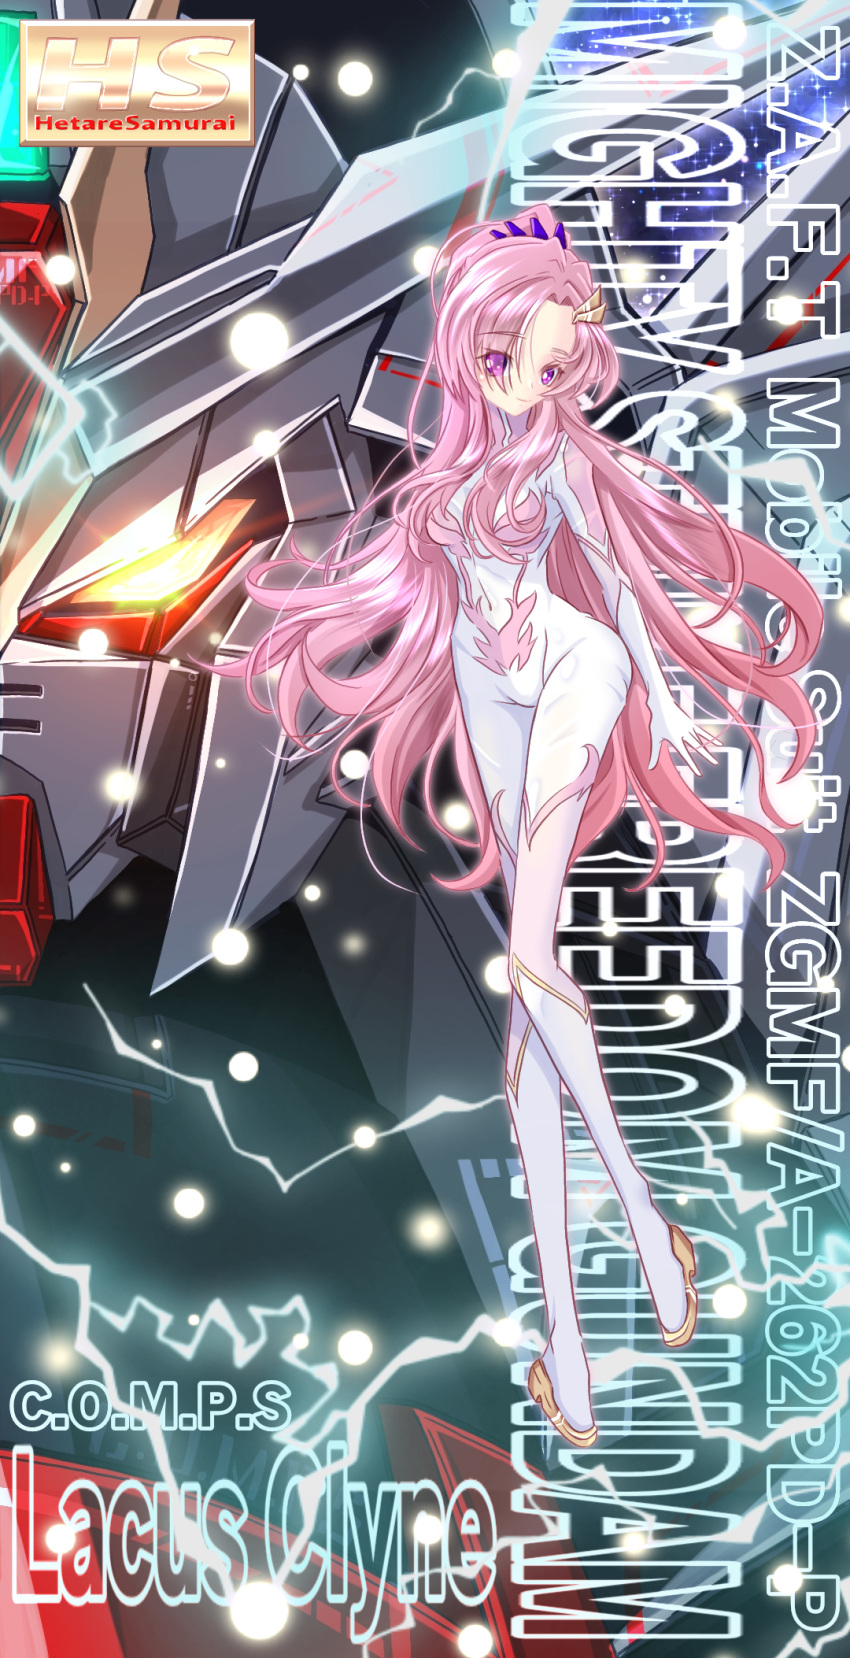 1girl bodysuit box_art character_name commentary_request electricity english_text fake_box_art full_body glowing glowing_eyes gundam gundam_seed gundam_seed_freedom hair_ornament hairclip highres lacus_clyne long_hair looking_at_viewer mecha mighty_strike_freedom_gundam mobile_suit pilot_suit pink_hair purple_eyes robot science_fiction upper_body user_tnmj5373 v-fin very_long_hair yellow_eyes